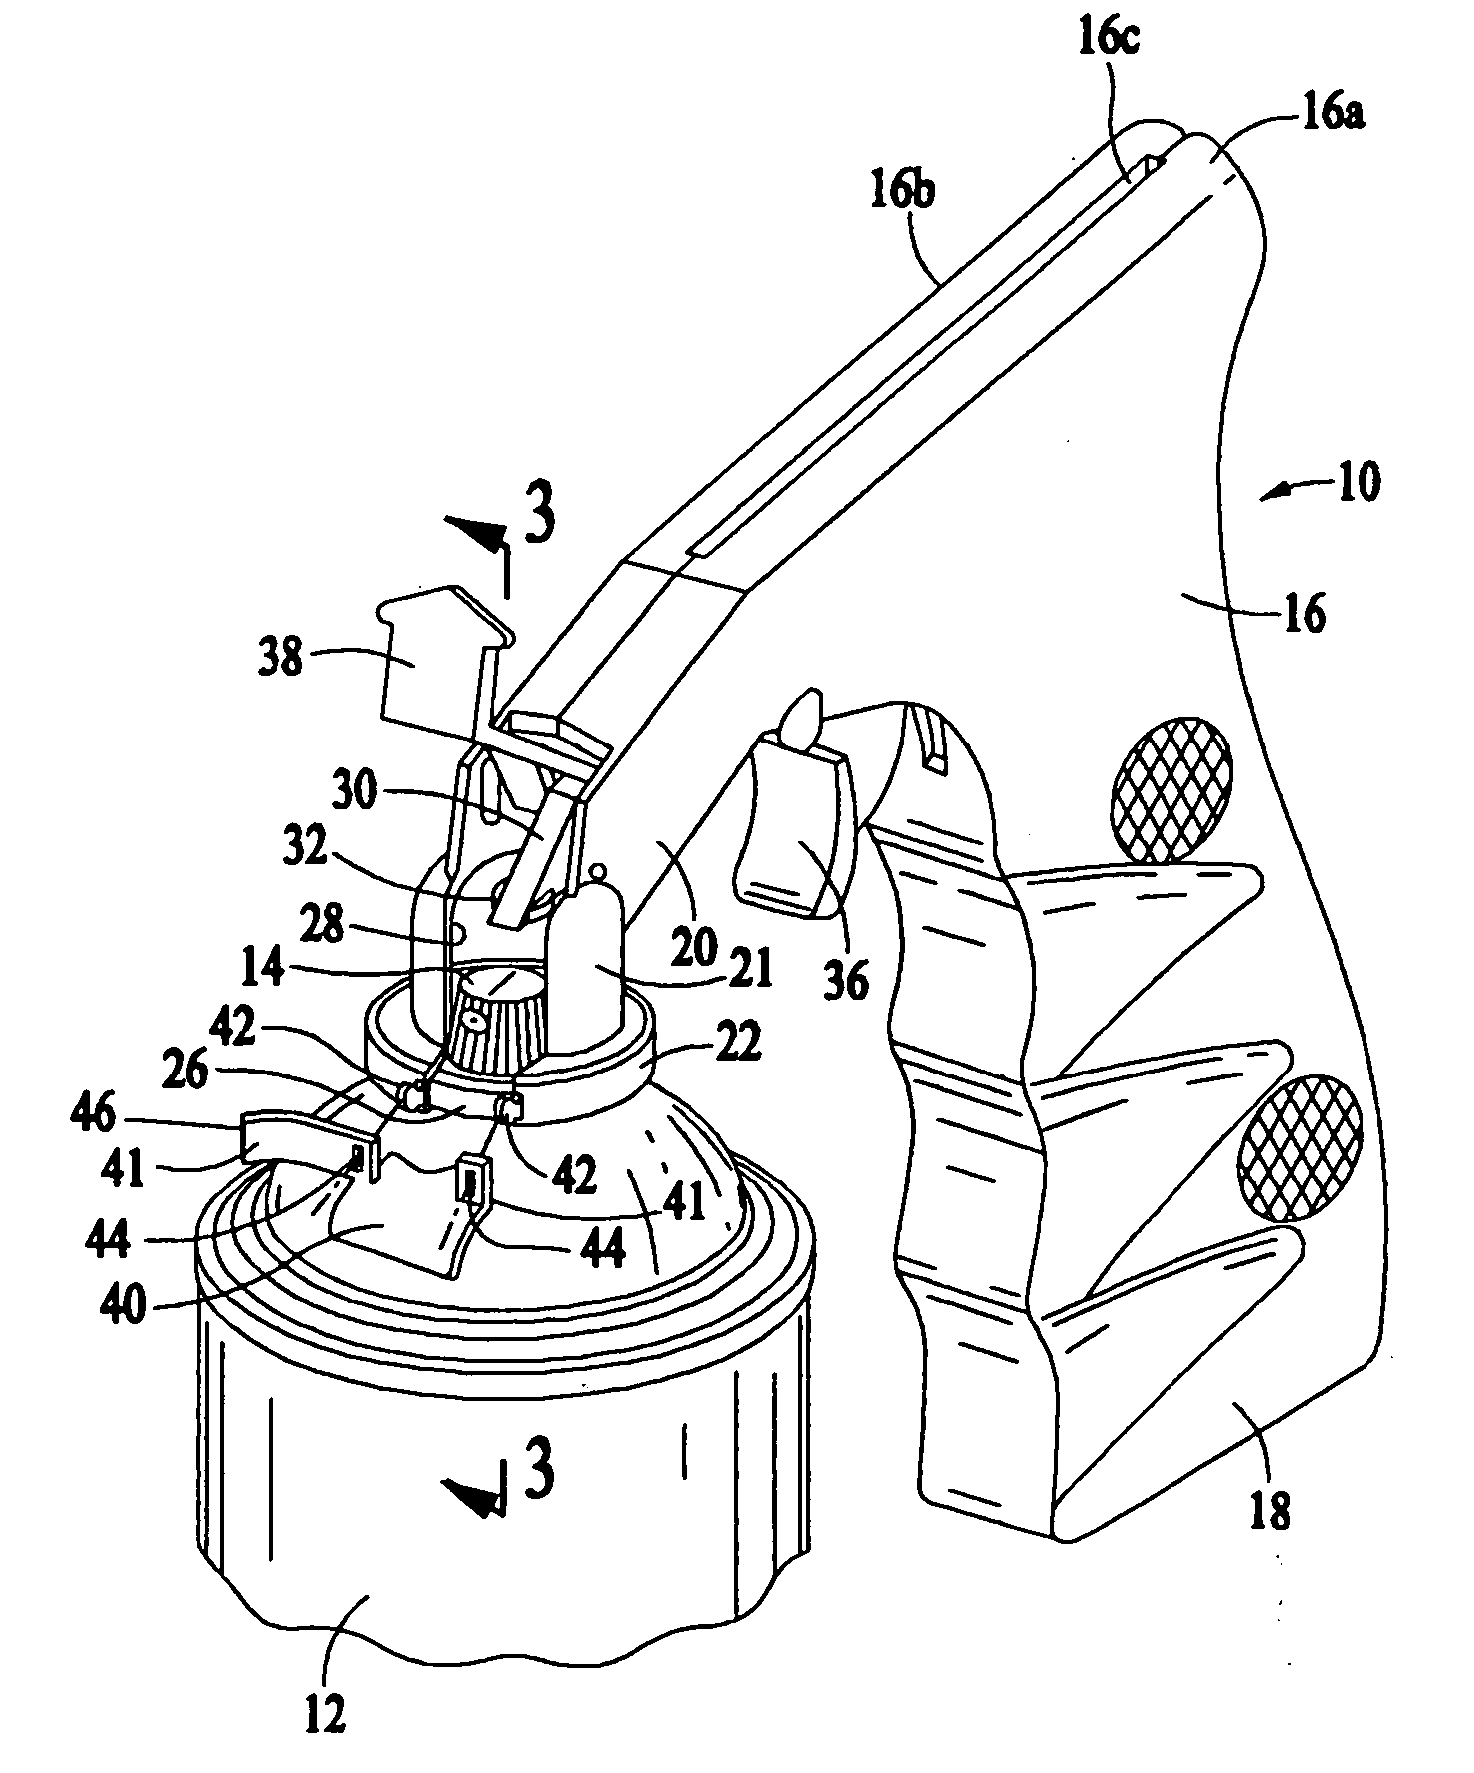 Spray can holding and actuating device